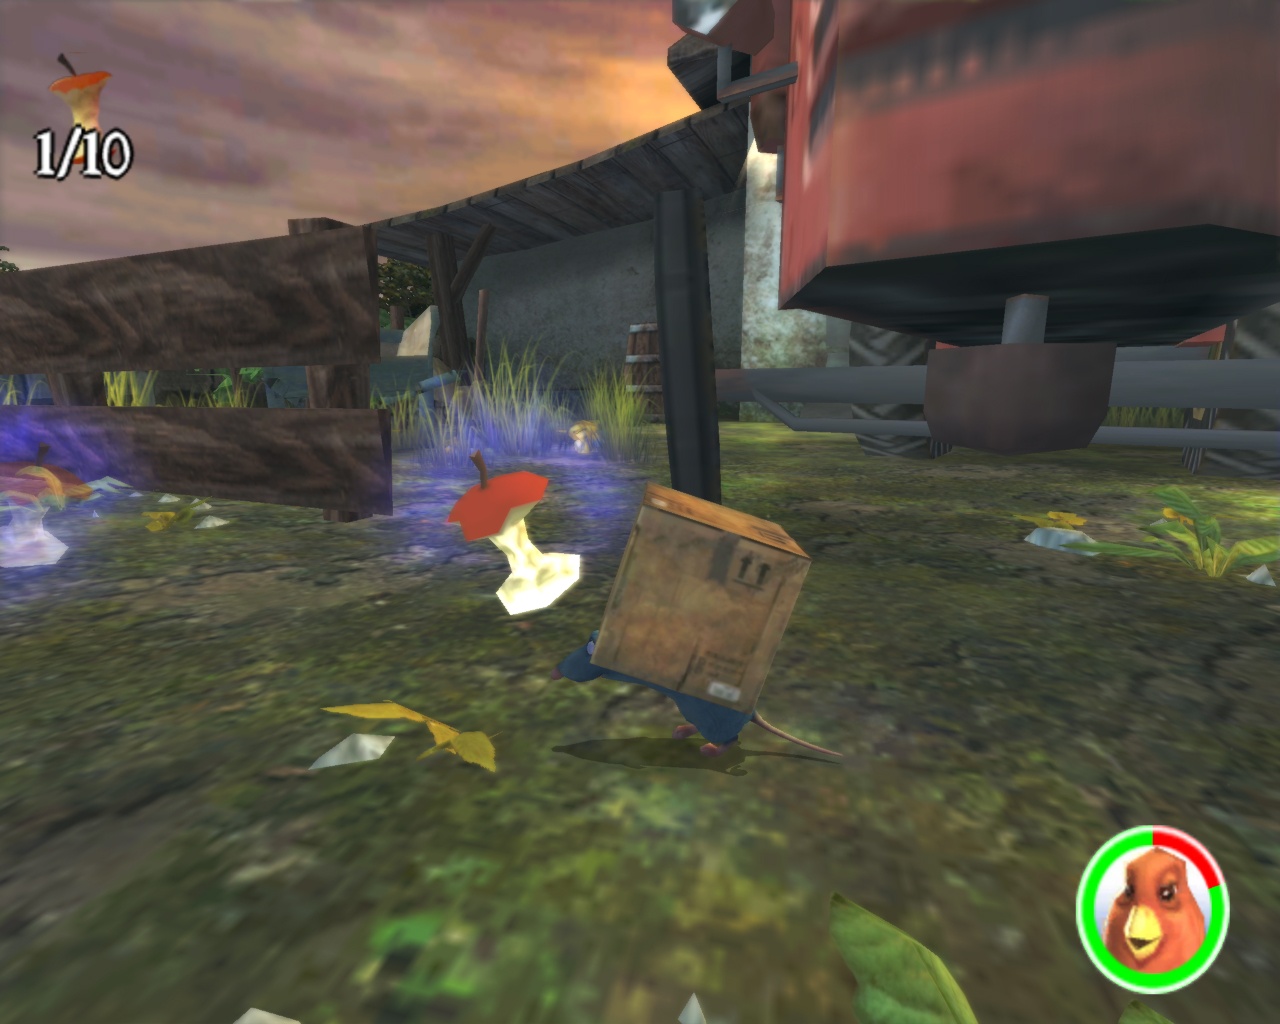 Ratatouille is about as standard a platformer as you'll ever find.